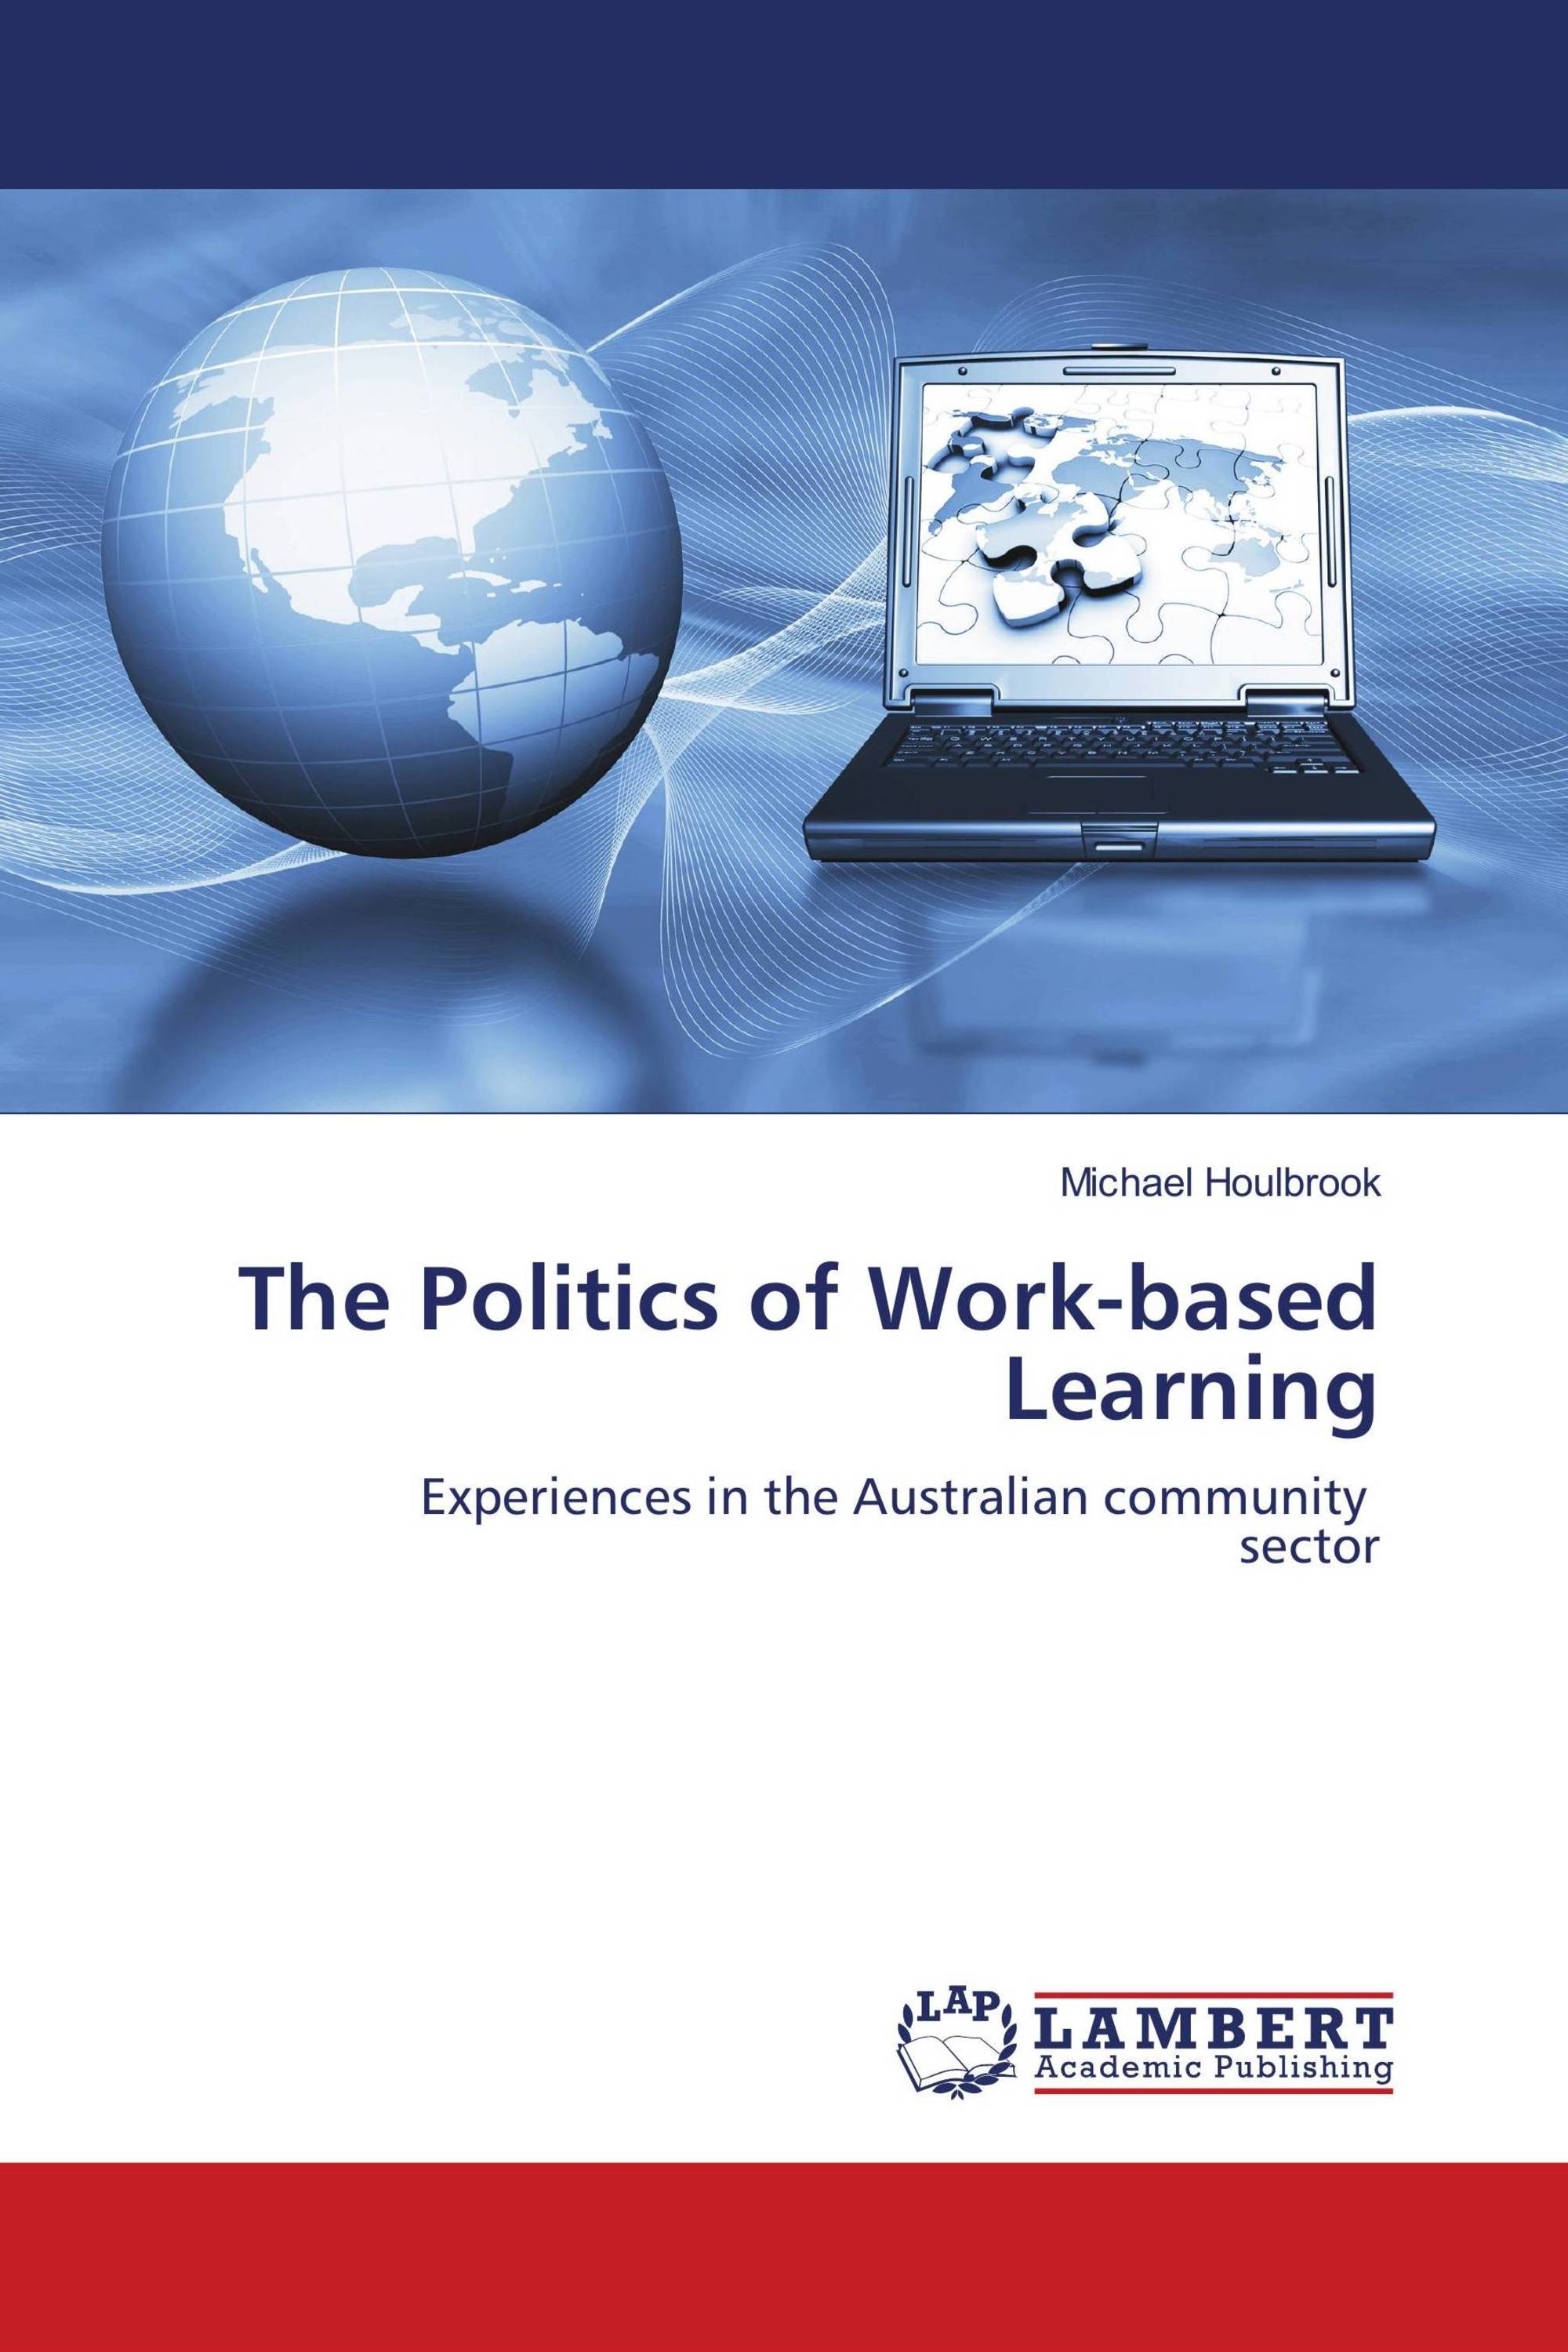 The Politics of Work-based Learning